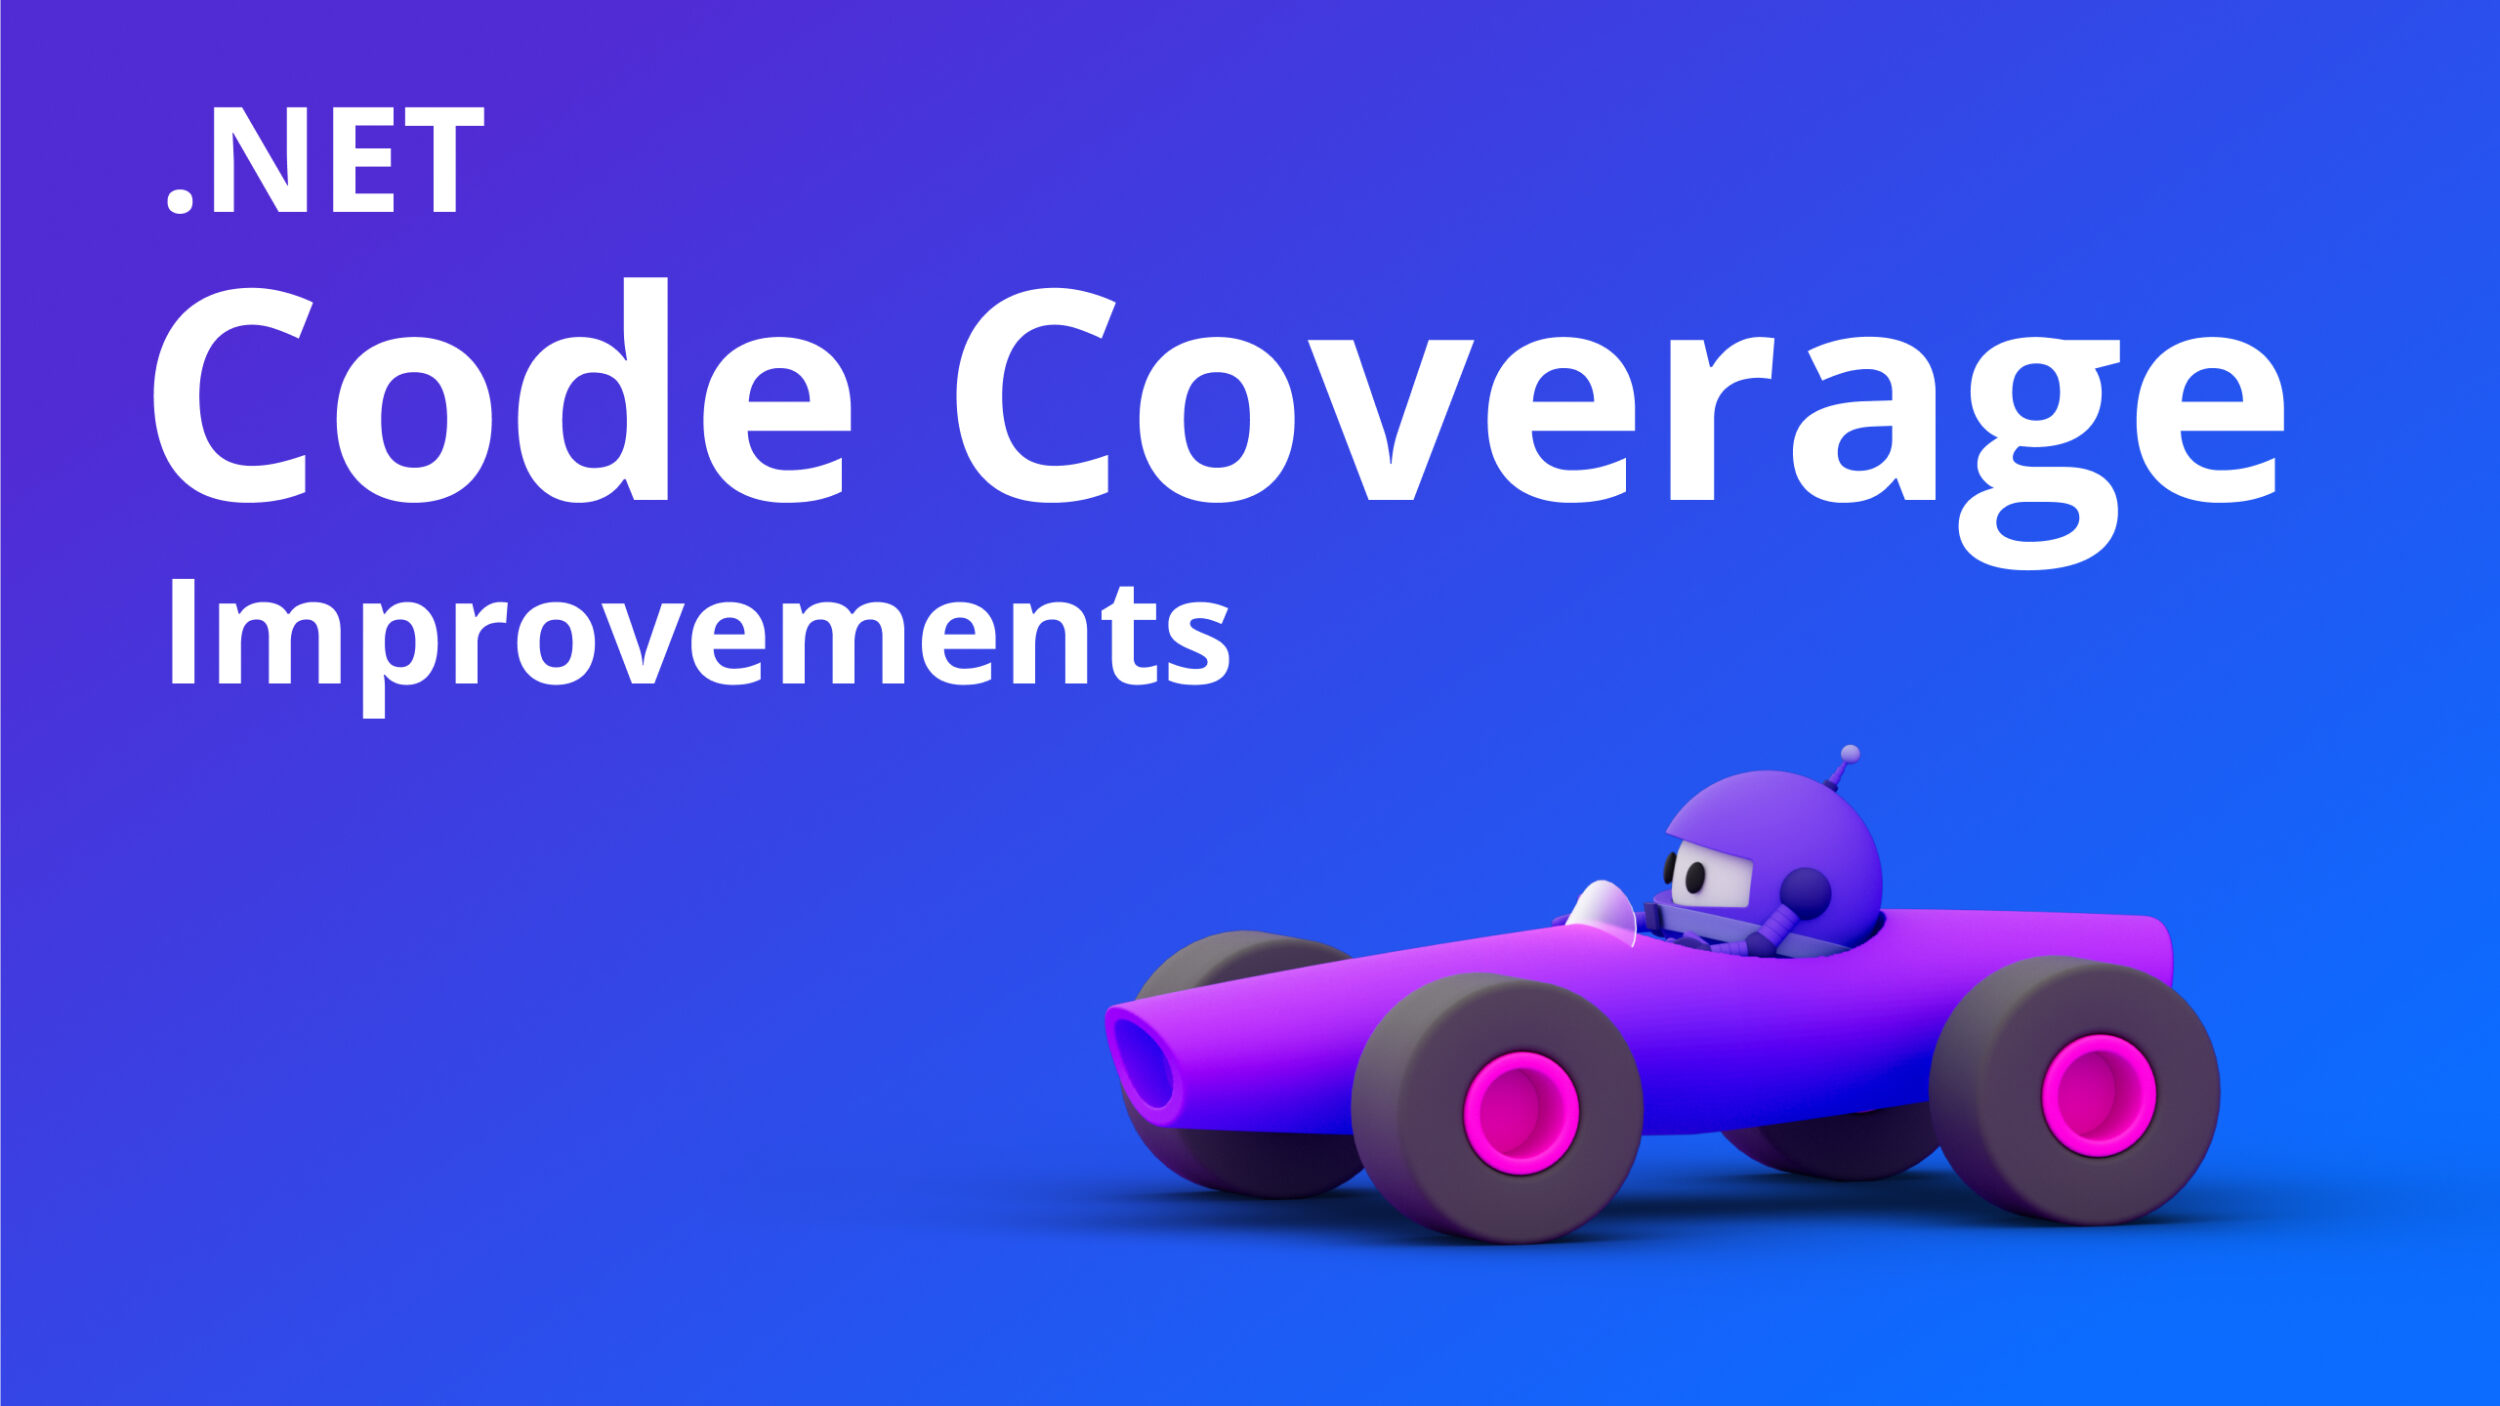 What's New in Our Code Coverage Tooling? - .NET Blog